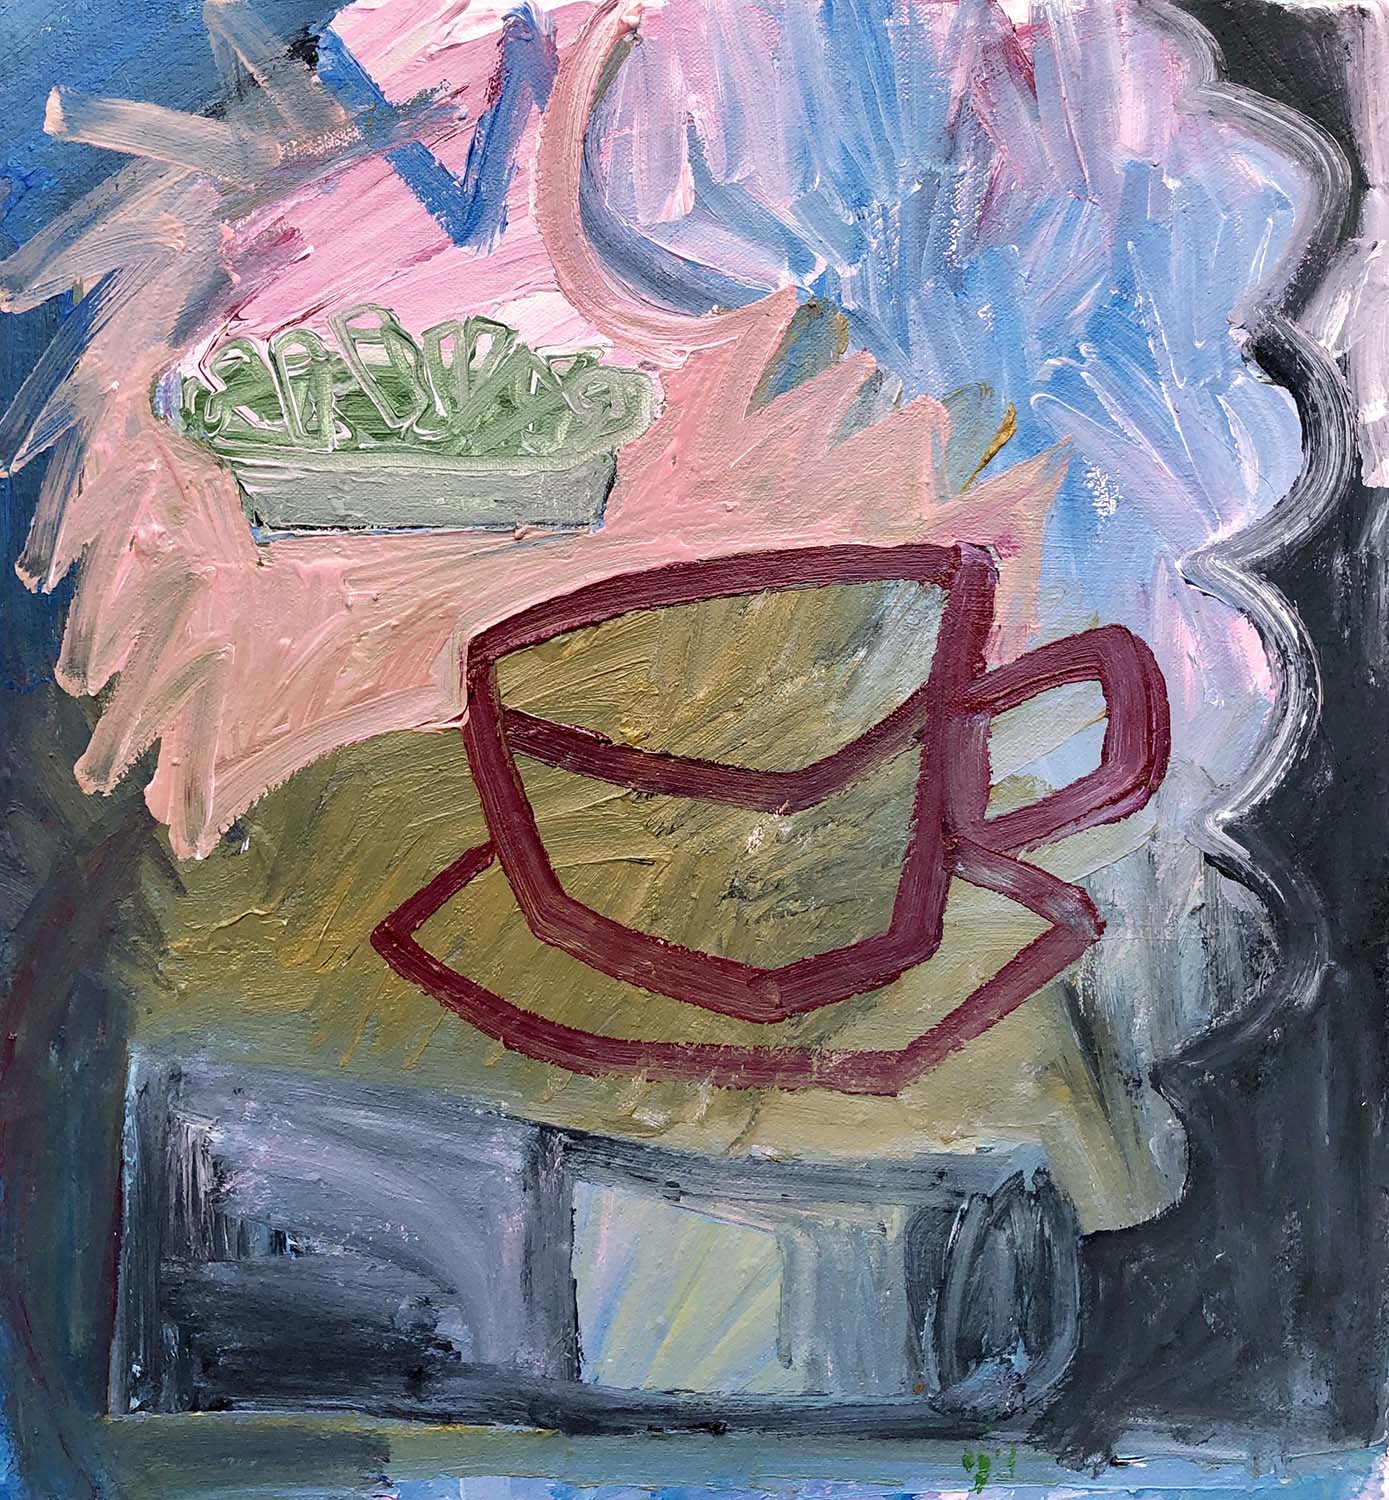 Painting of red tea cup and cigarettes